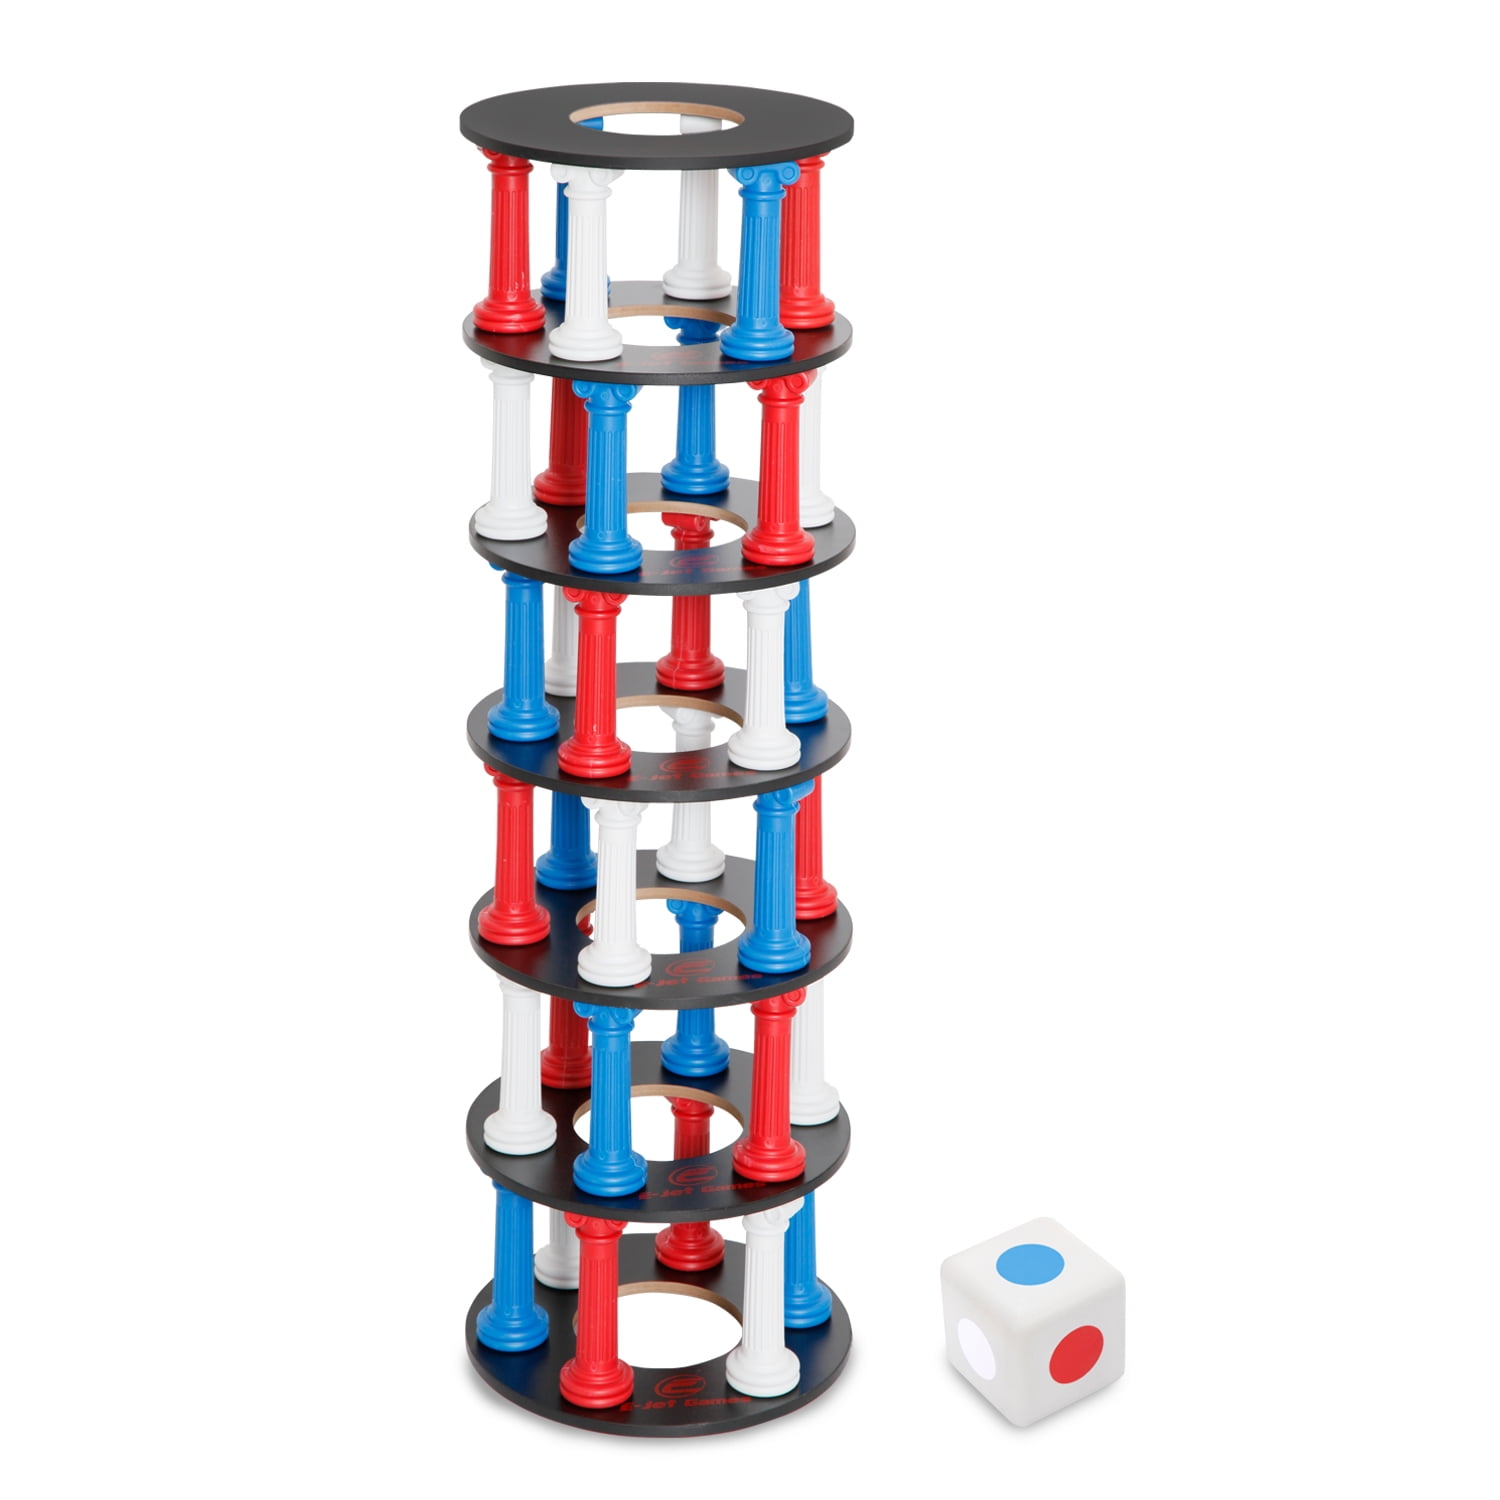 MOST Intense Game EVER!! Tetra Tower for 2-4 players #shorts #games  #shorts 